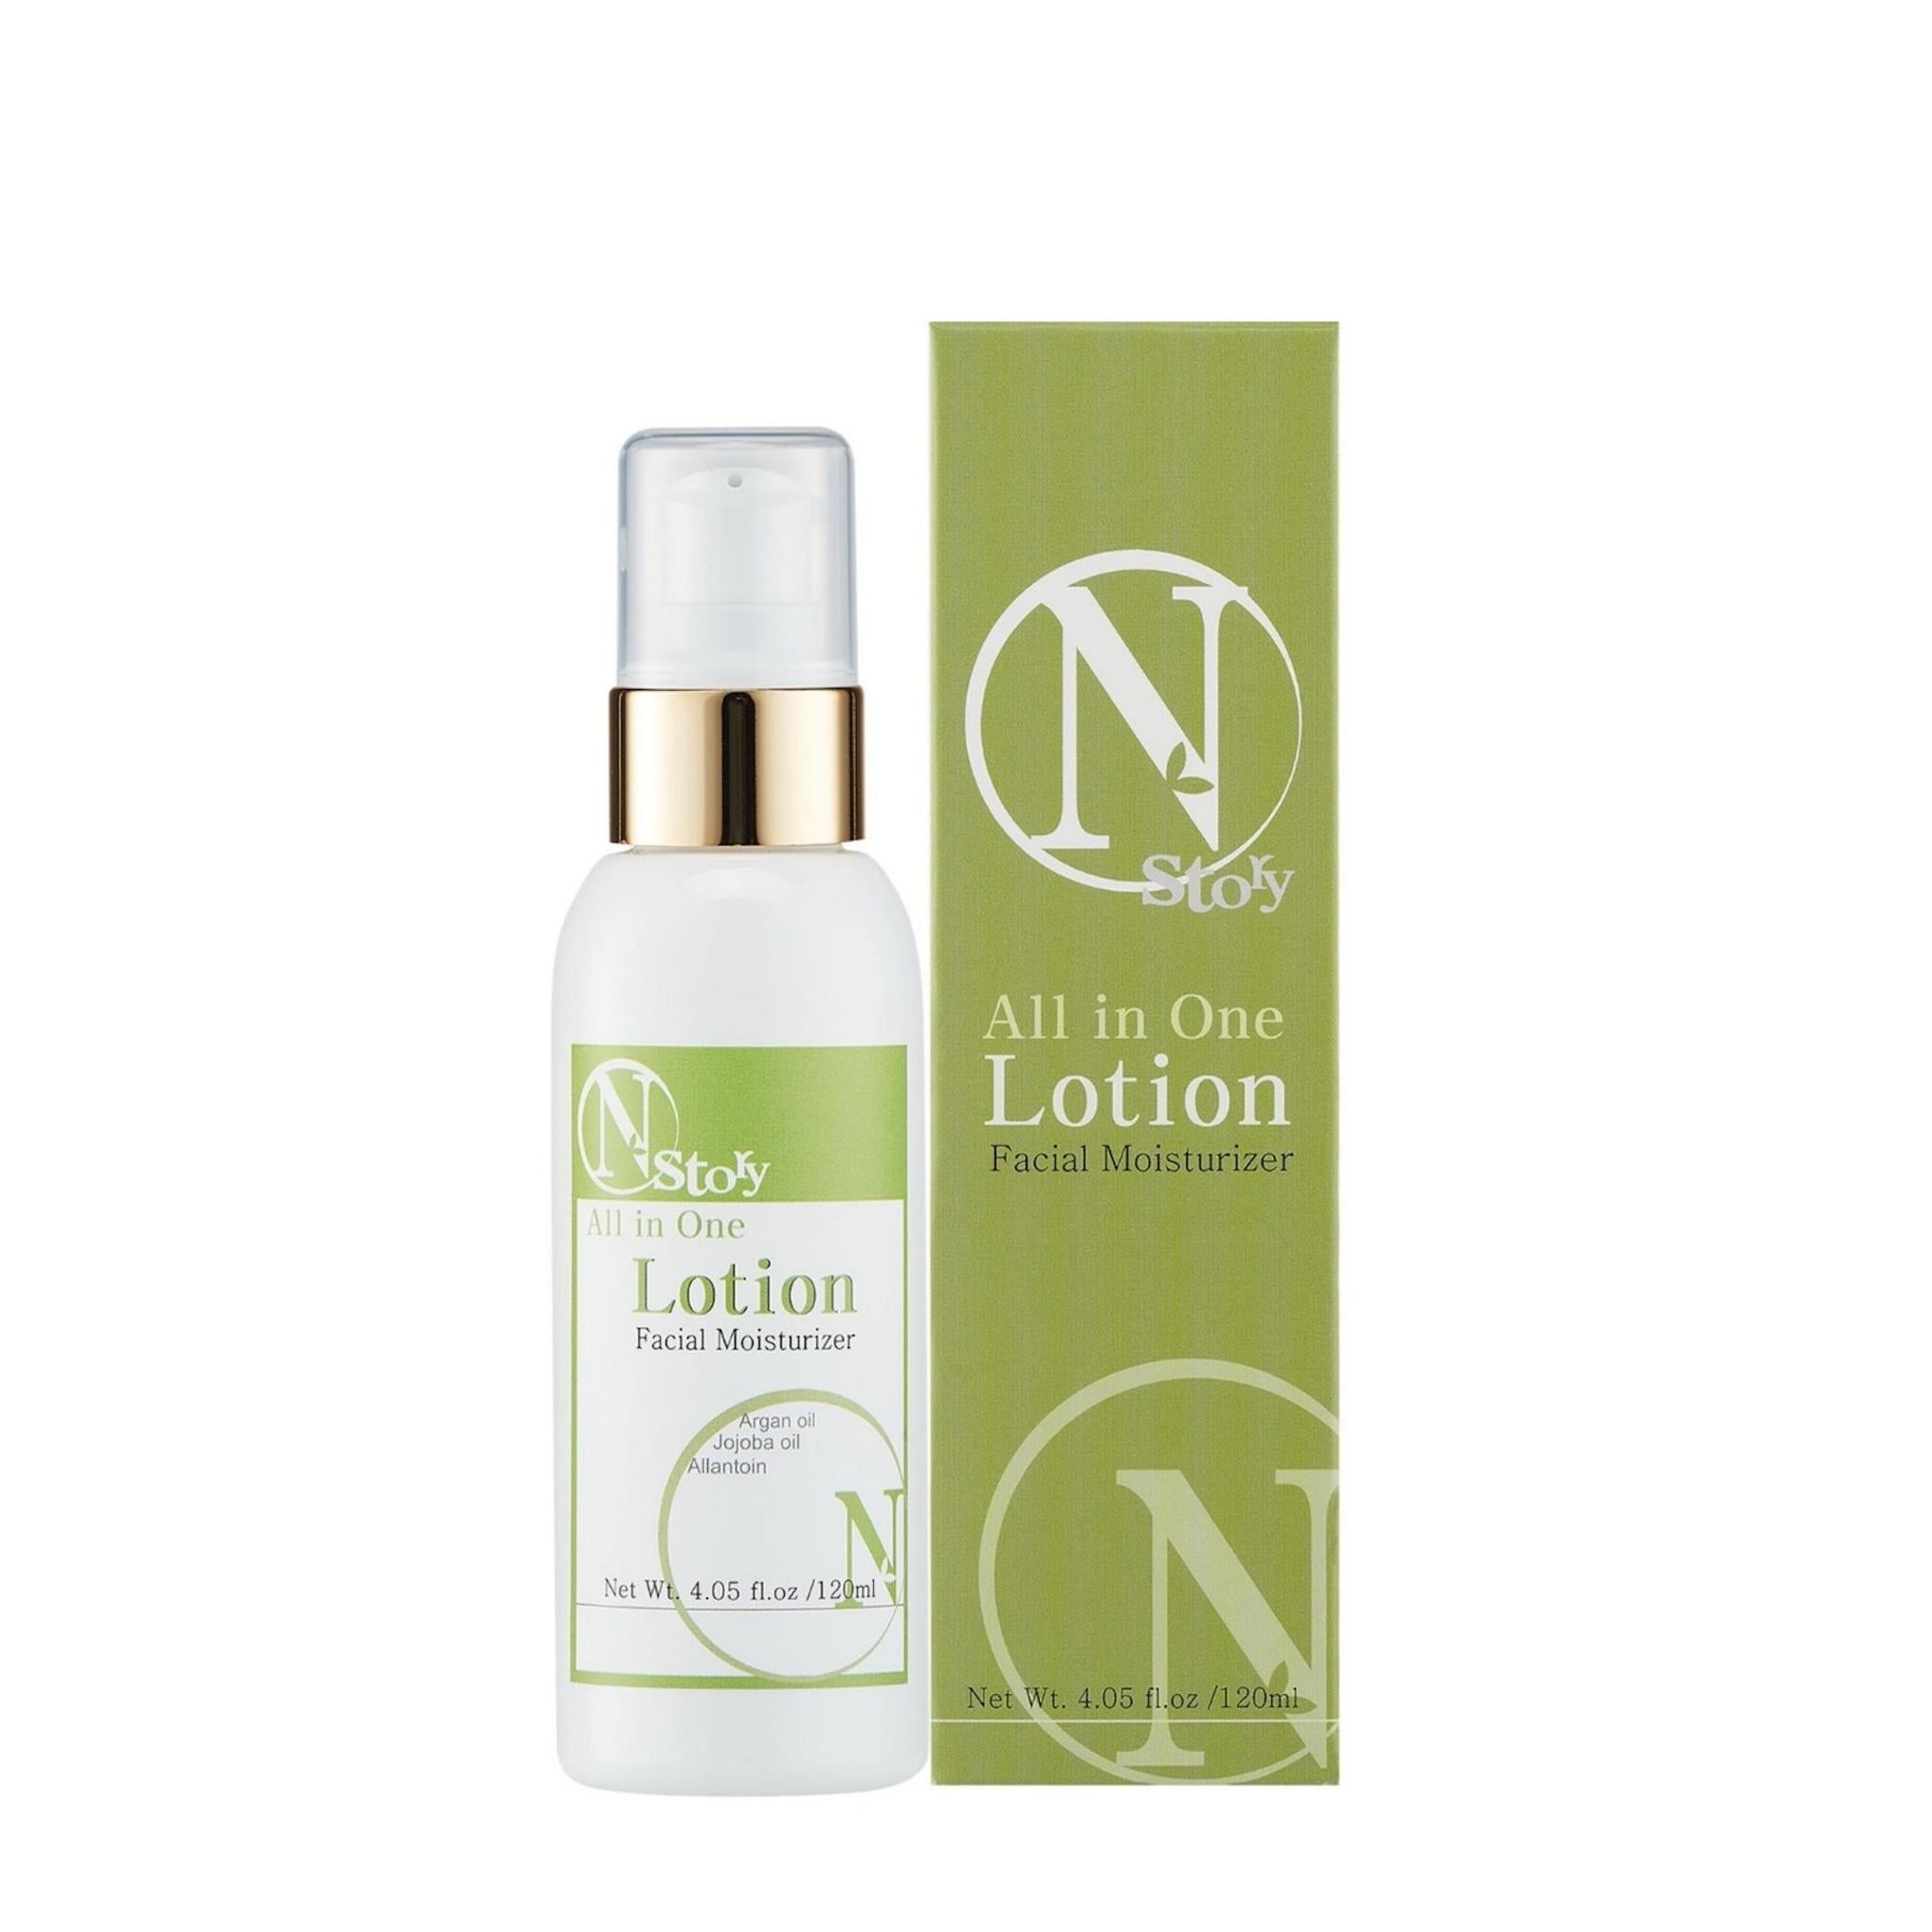 Nstory All-in-One Lotion